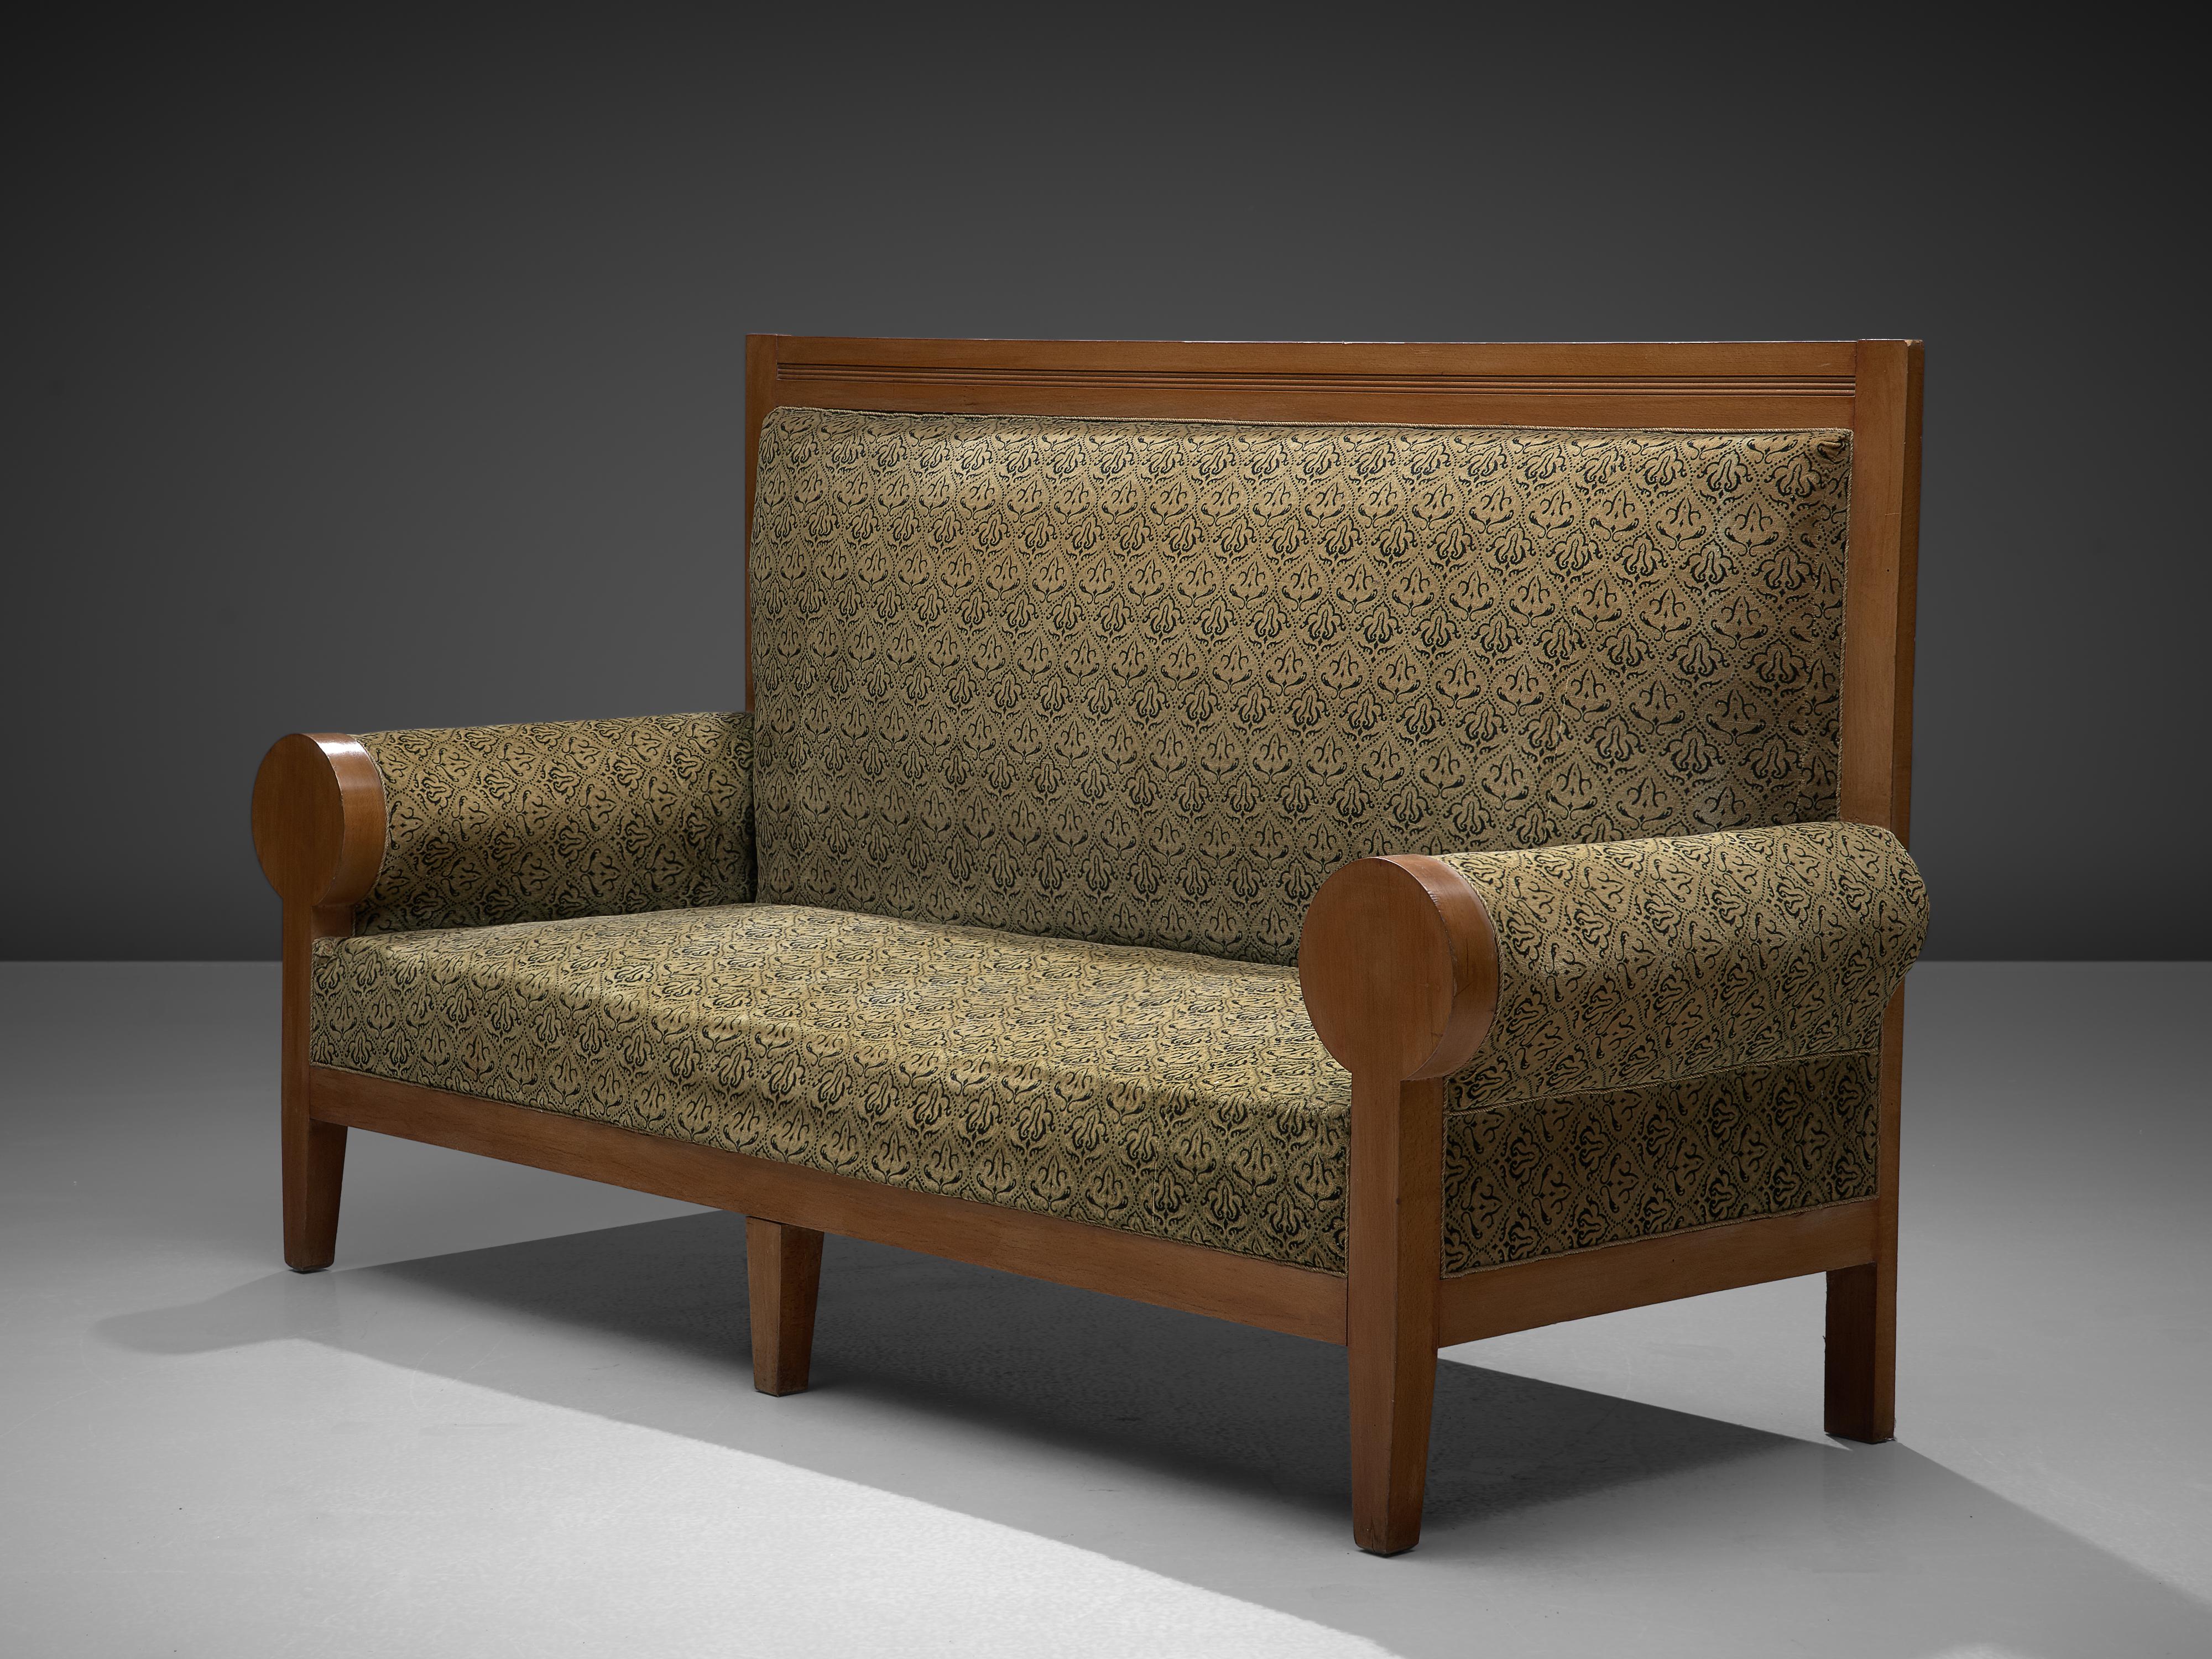 Sofa, beech, fabric, Europe, 1940s

This sofa is a beautiful piece made in the late Art Deco period in Europe. It has a very strong appearance, due the high back and the angular shapes in the design. The appearance of this sofa comes across majestic